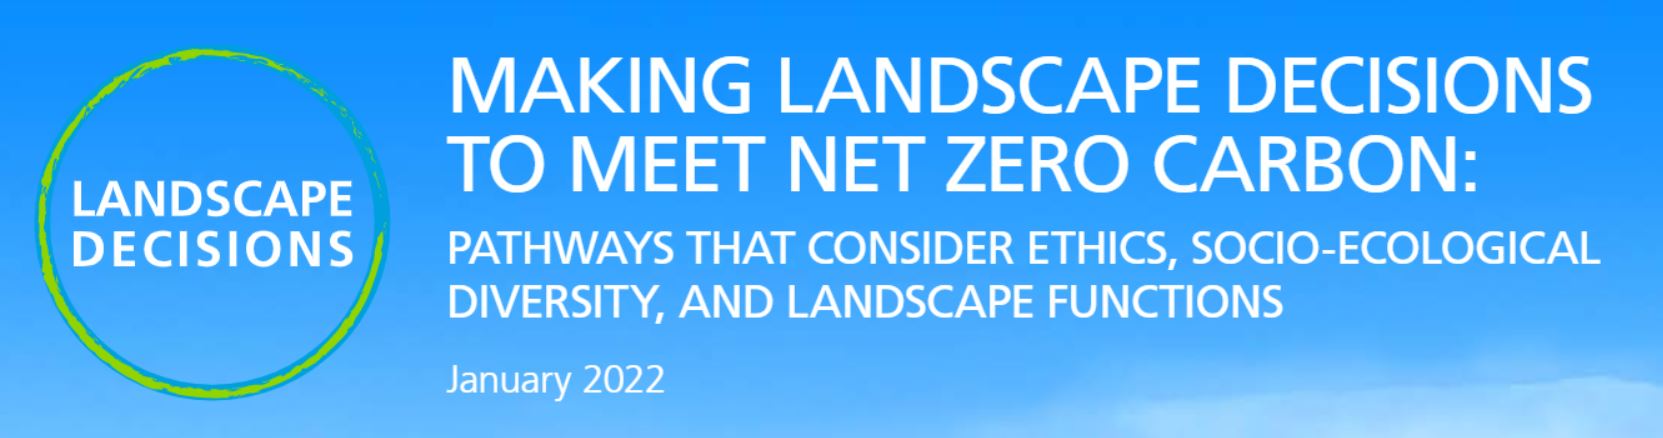 Making Landscape Decisions to Meet Net Zero Carbon: Pathways that consider ethics, socio-ecological diversity, and landscape functions